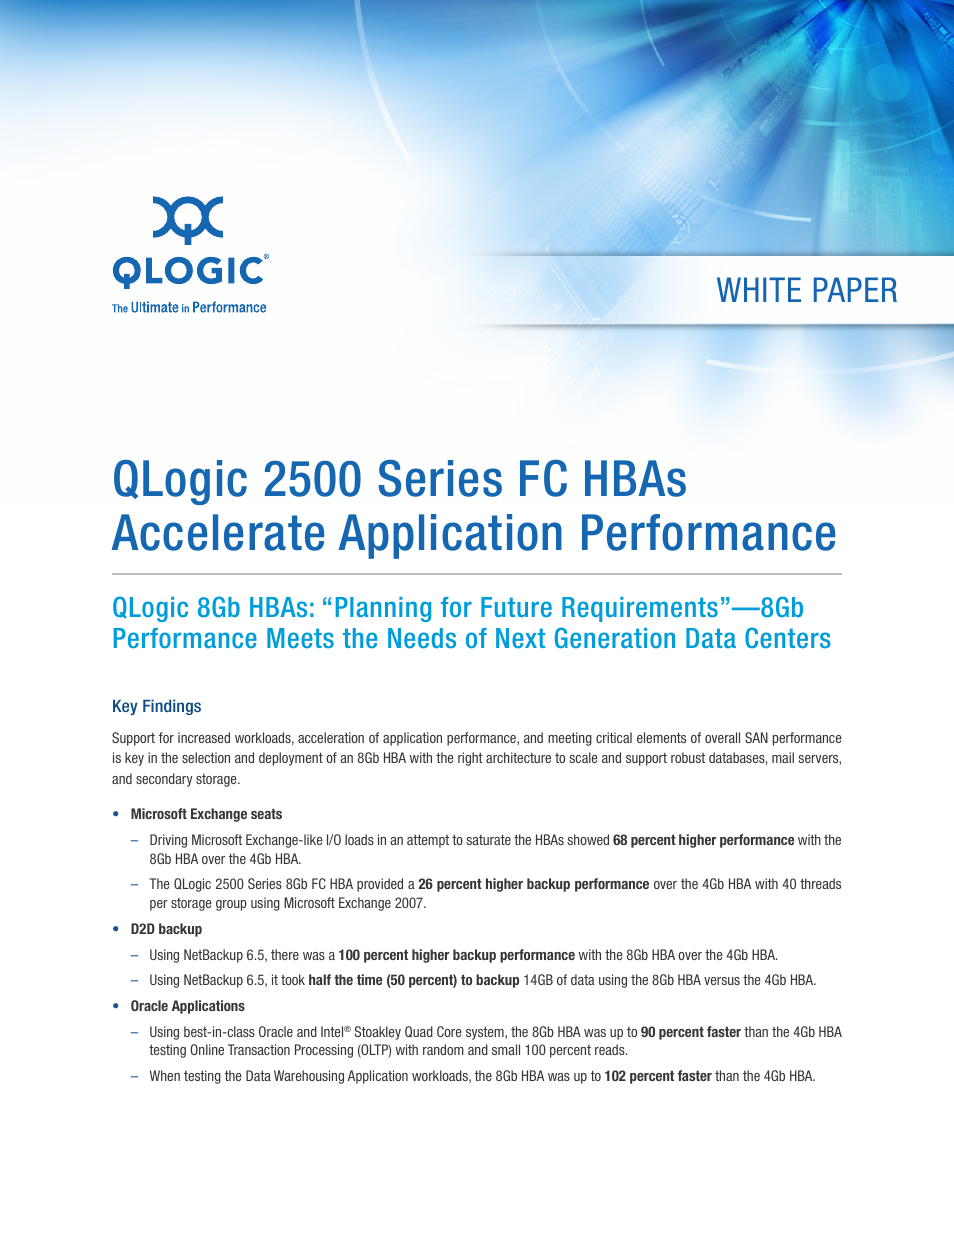 2500 Series FC HBAs Accelerate Application Performance